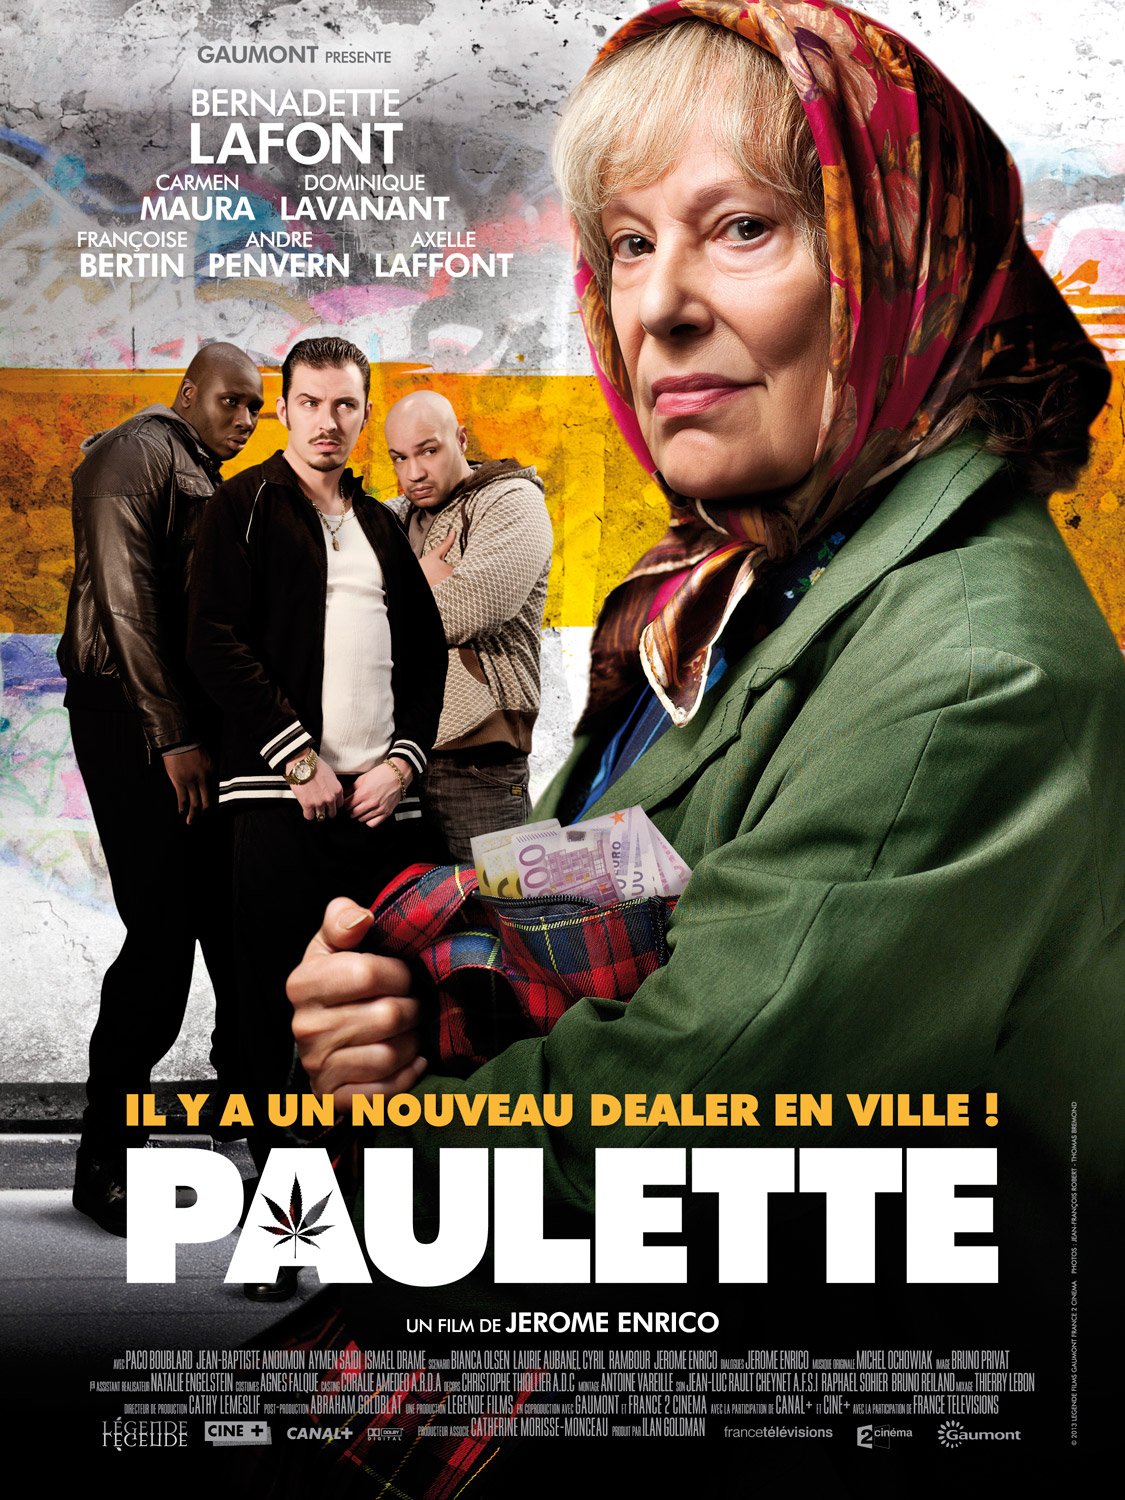 Poster of the movie Paulette